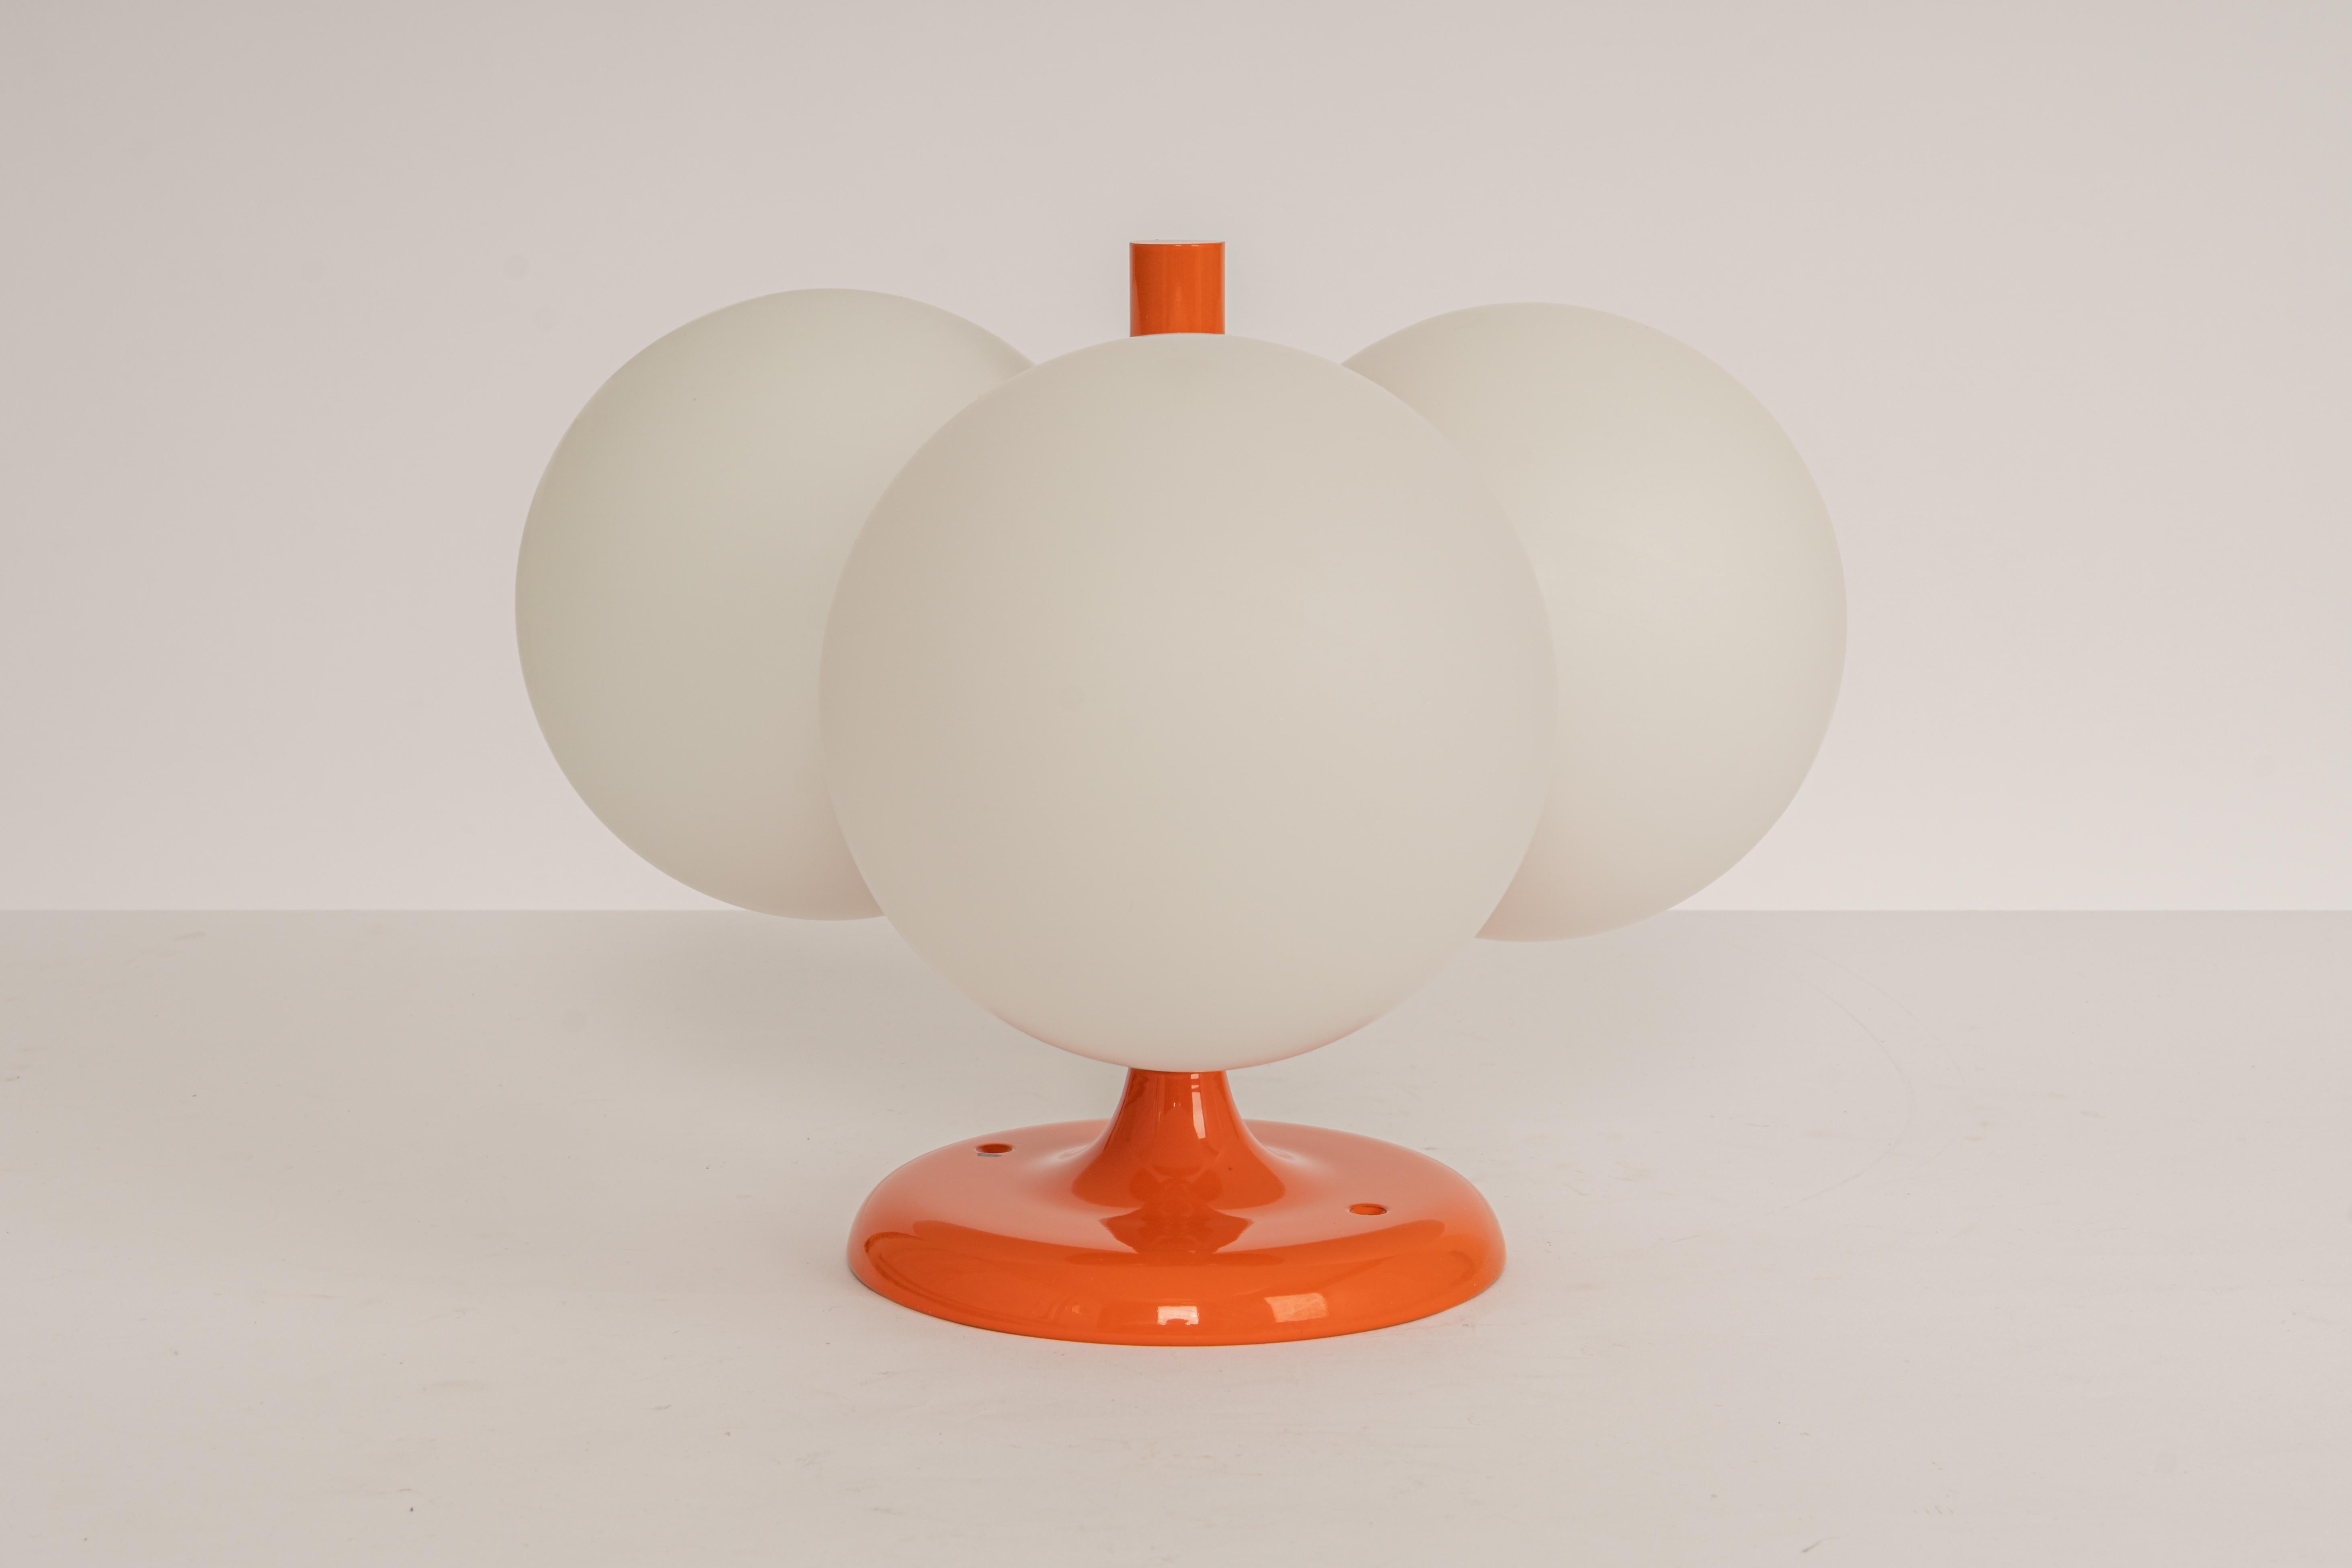 1 of 2 midcentury vintage ceiling or wall light in orange color made by Kaiser Leuchten, Germany with 3 opal glass balls.
High quality and in very good condition. Cleaned, well-wired, and ready to use. 

The fixture requires 3 x E14 small bulbs